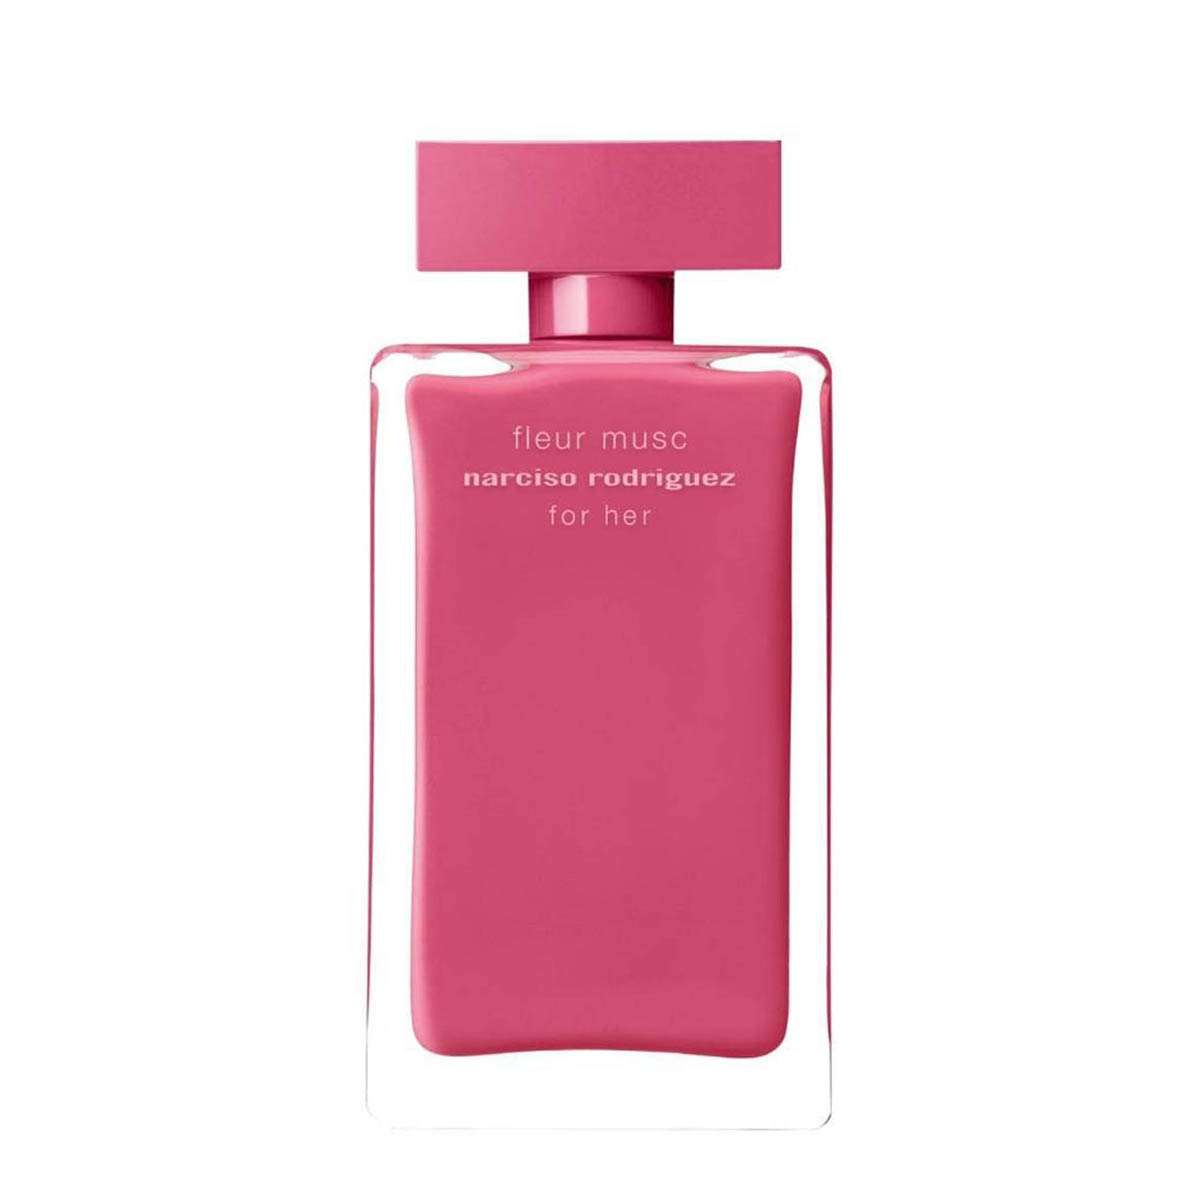 For Her Forever, A Beautiful Variation of Narciso Rodriguez